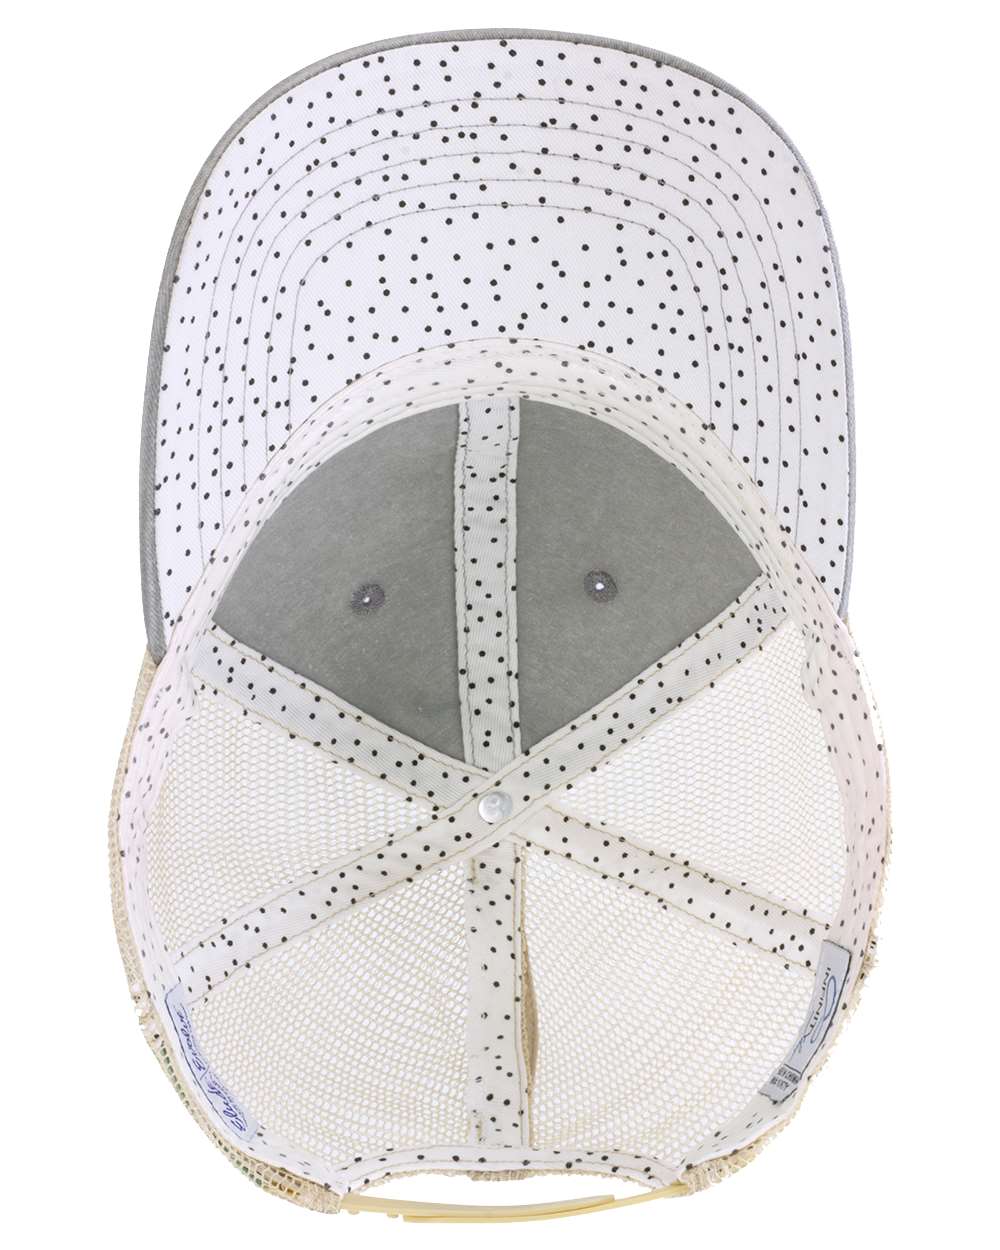 A women's washed mesh-back cap in light grey with polka dot pattern on the front panel.